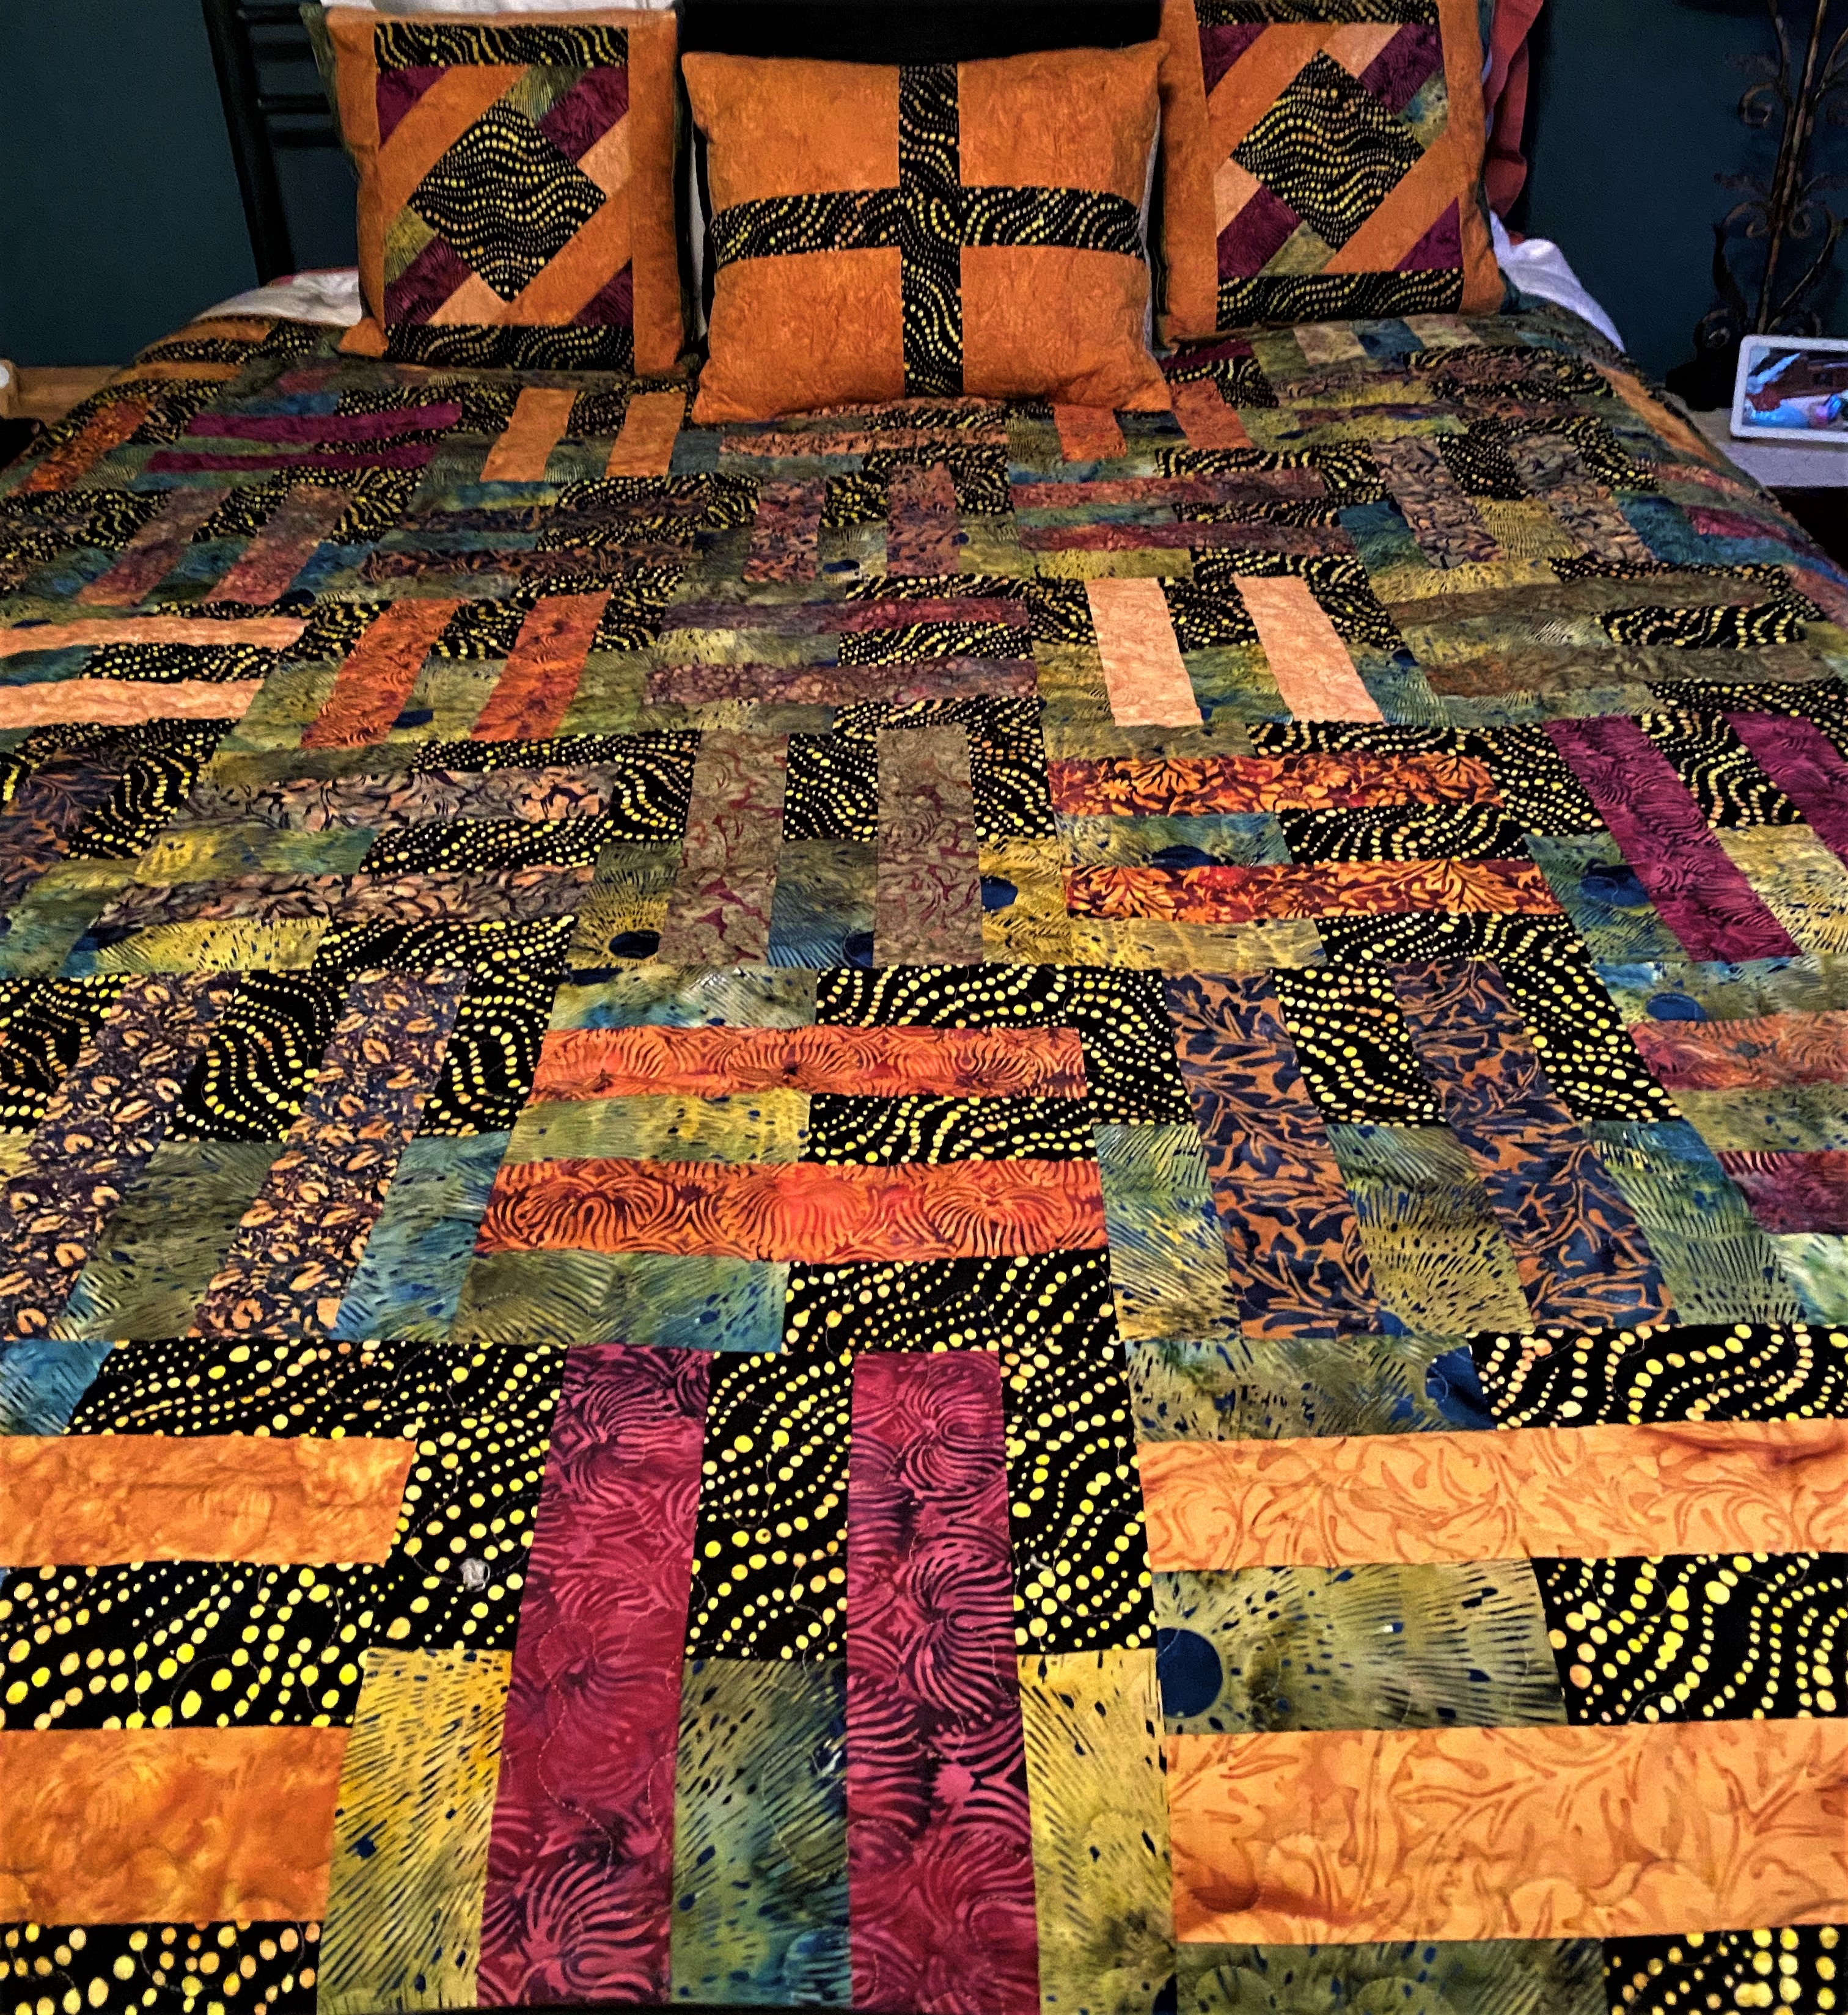 2022_01_ShowNTell_14_Conti_FallQuilt